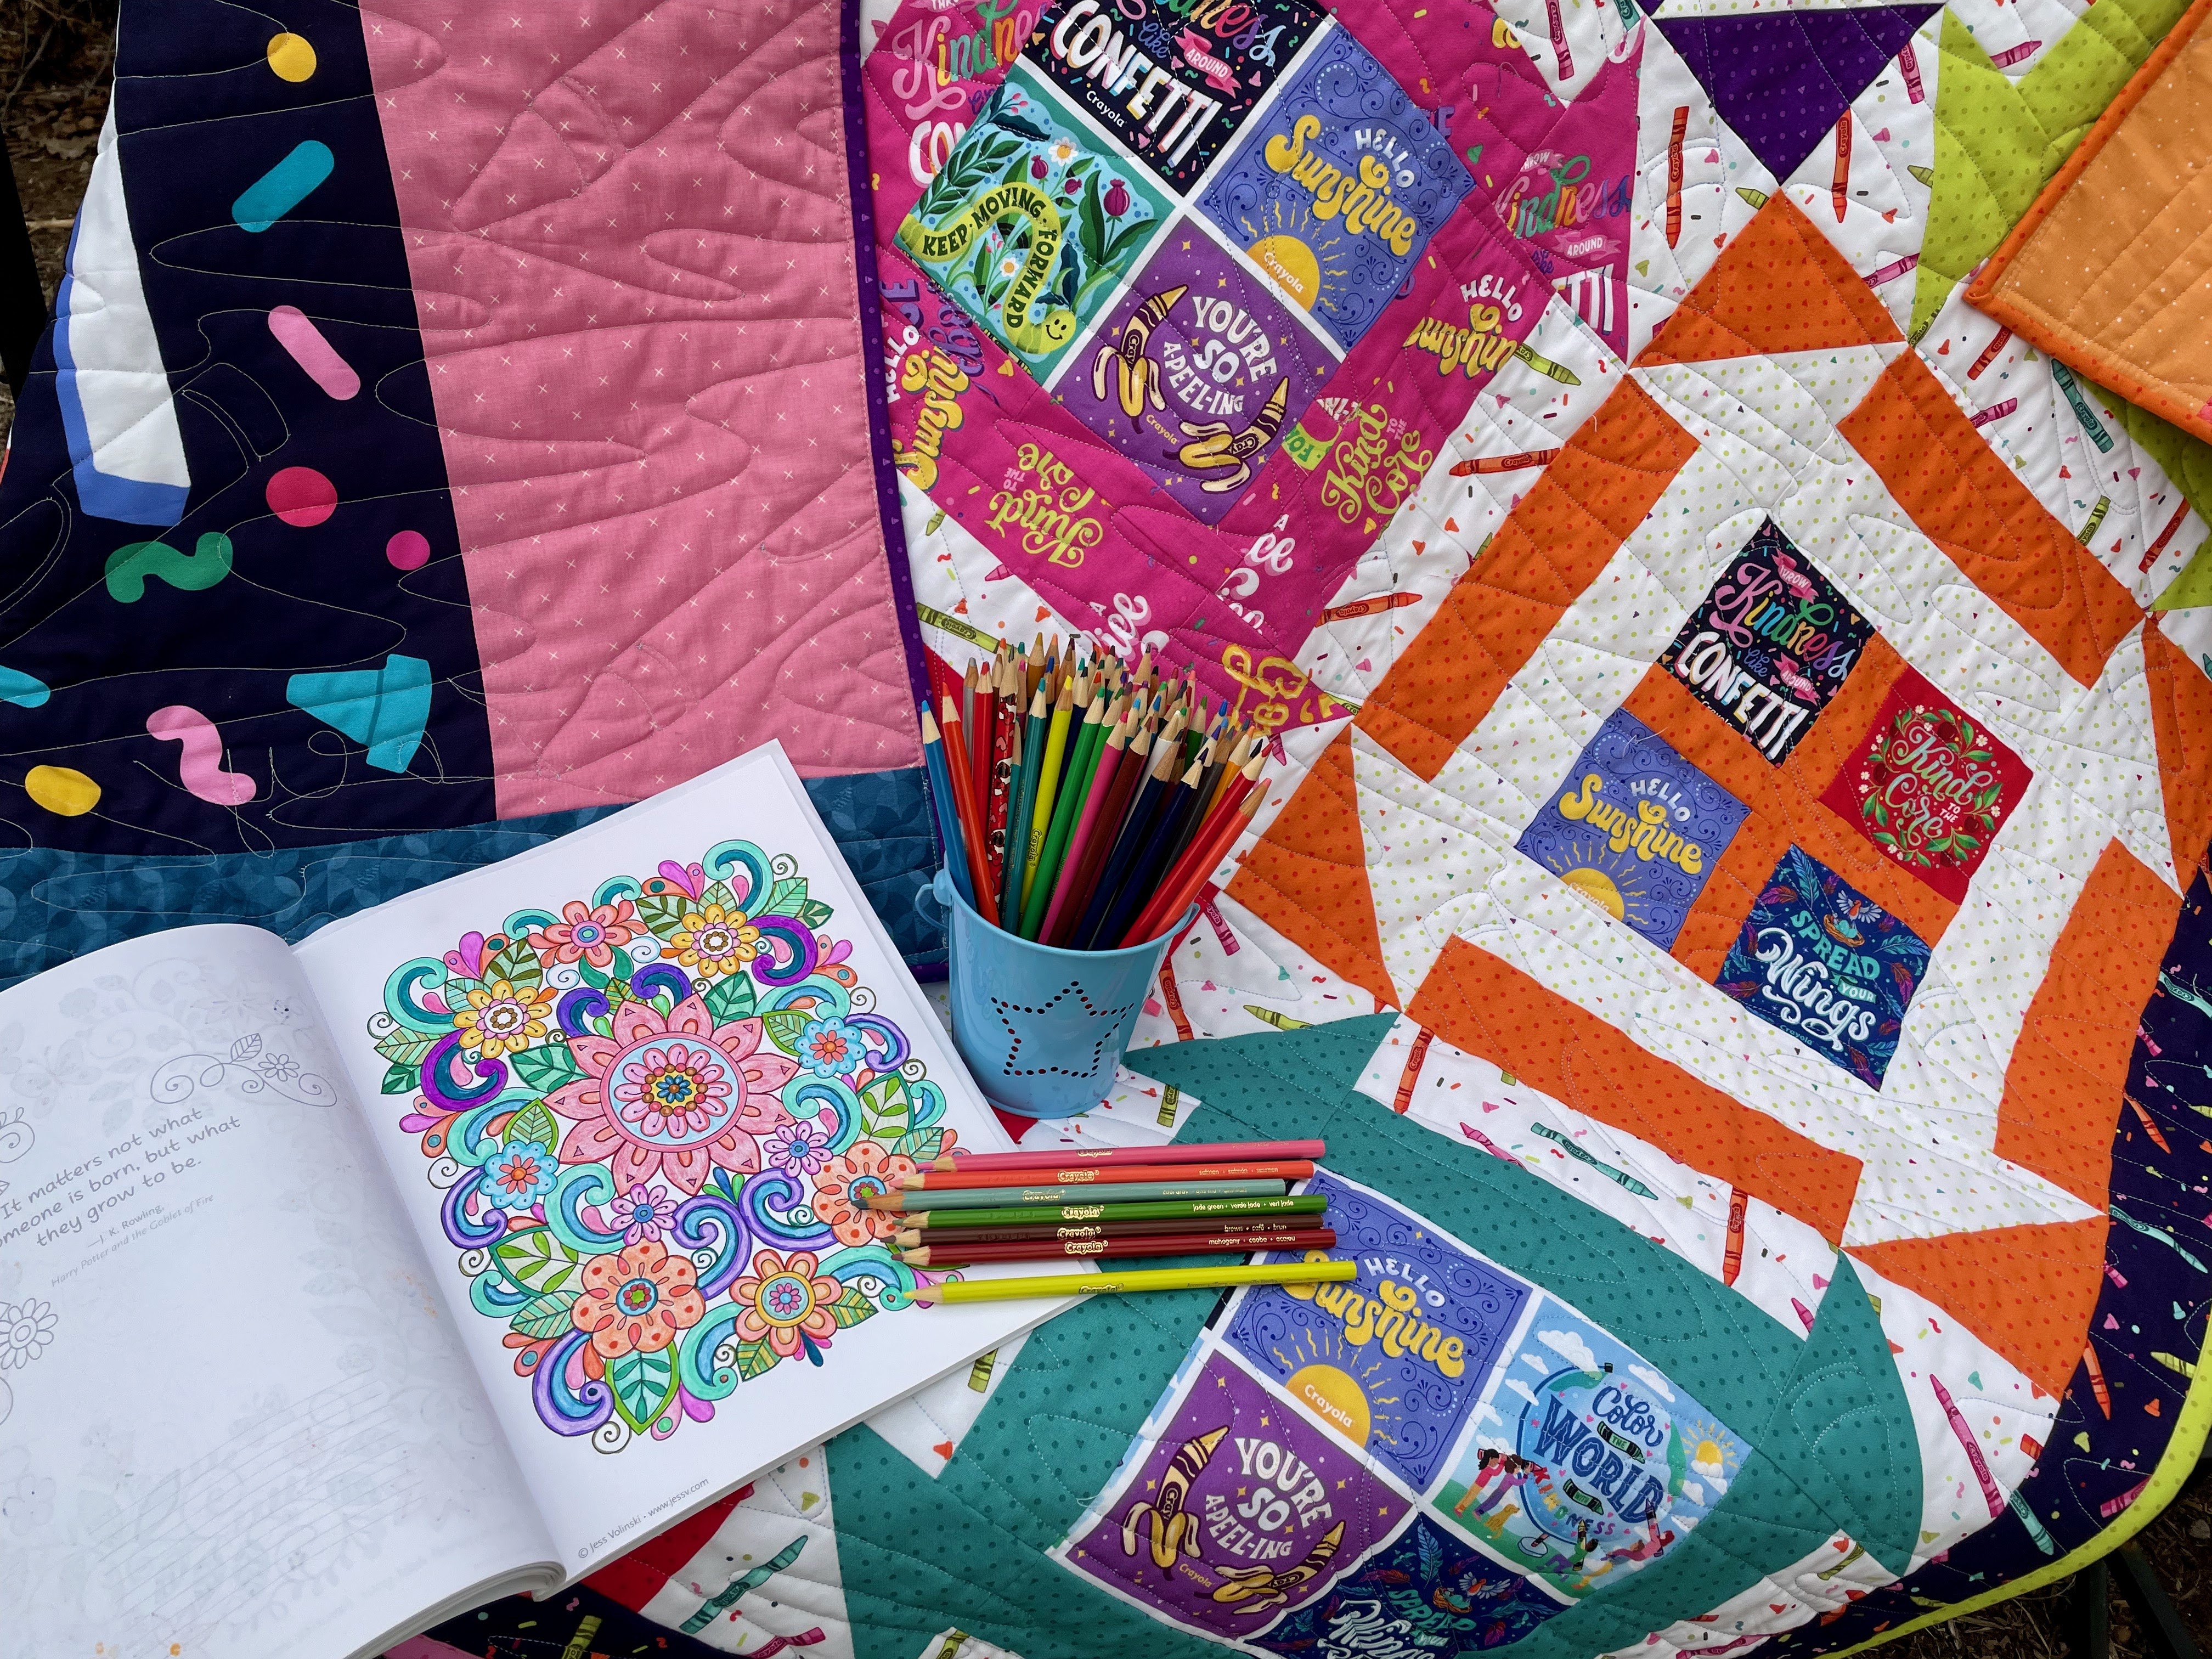 15 Amazing Quilt Books for 2023